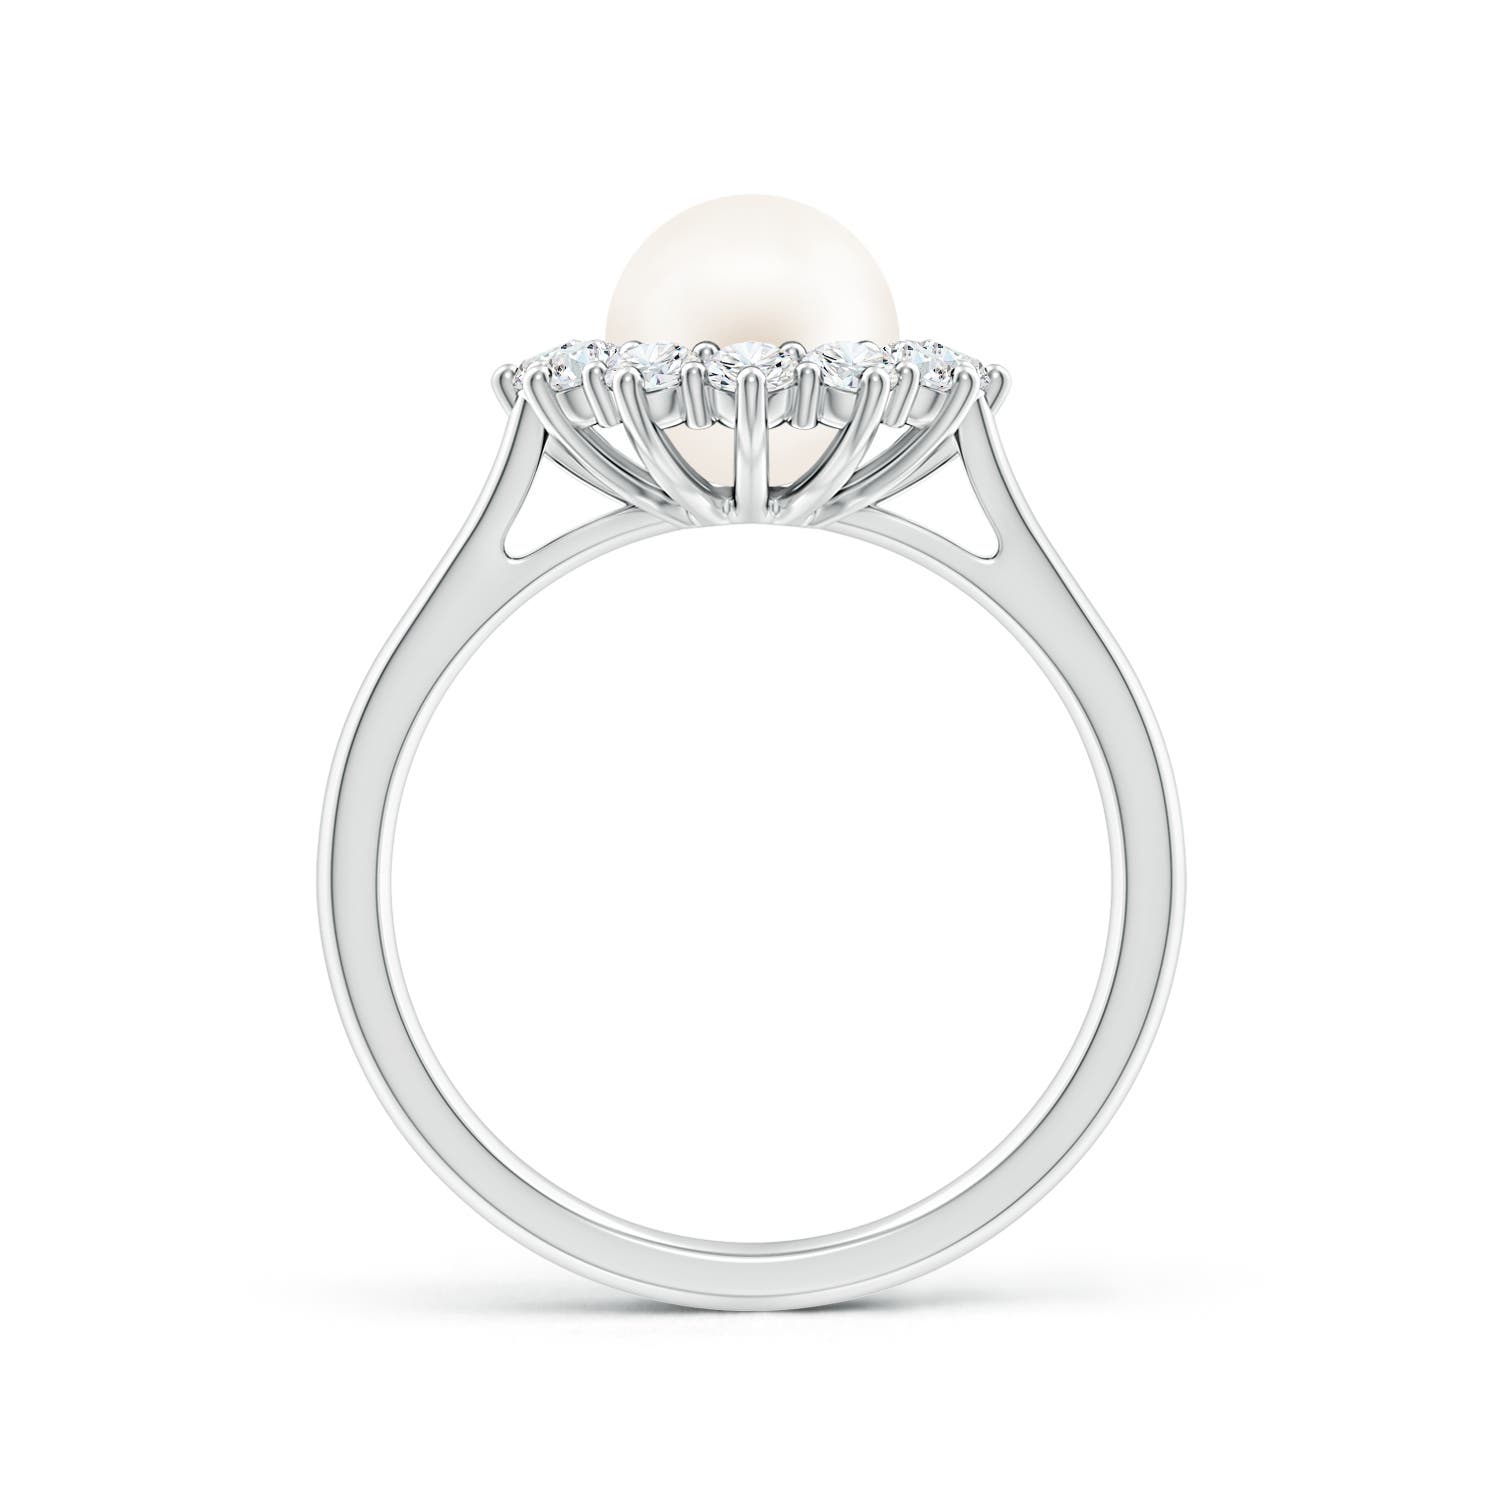 AA / 3 CT / 14 KT White Gold